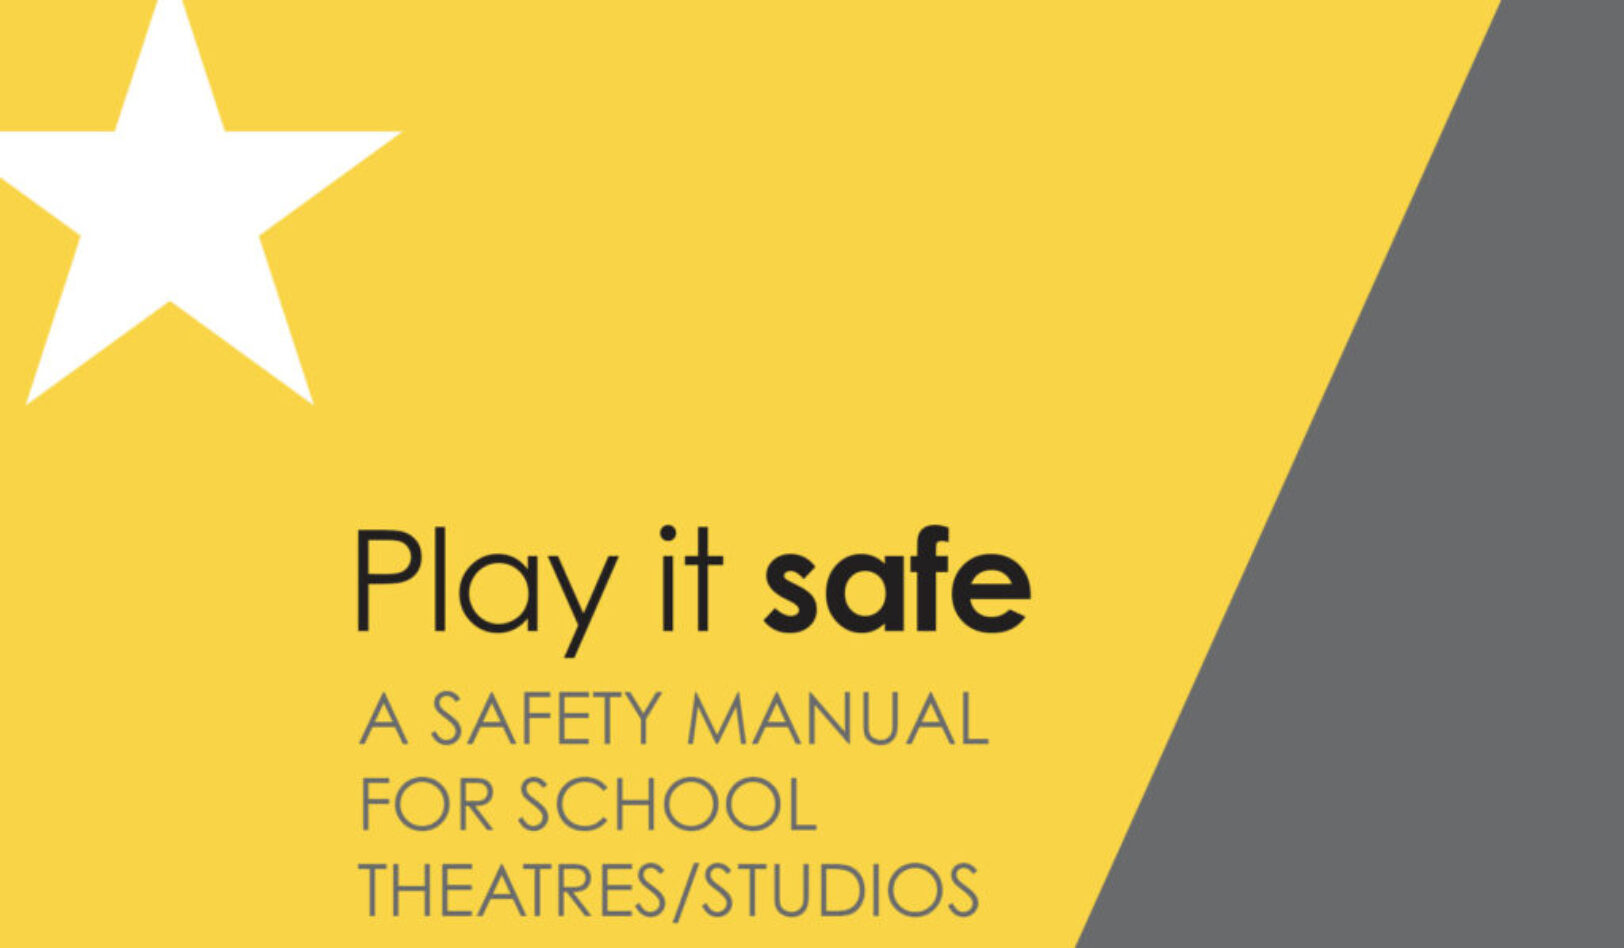 Play It Safe Safety For School Theatre/Studios Manual